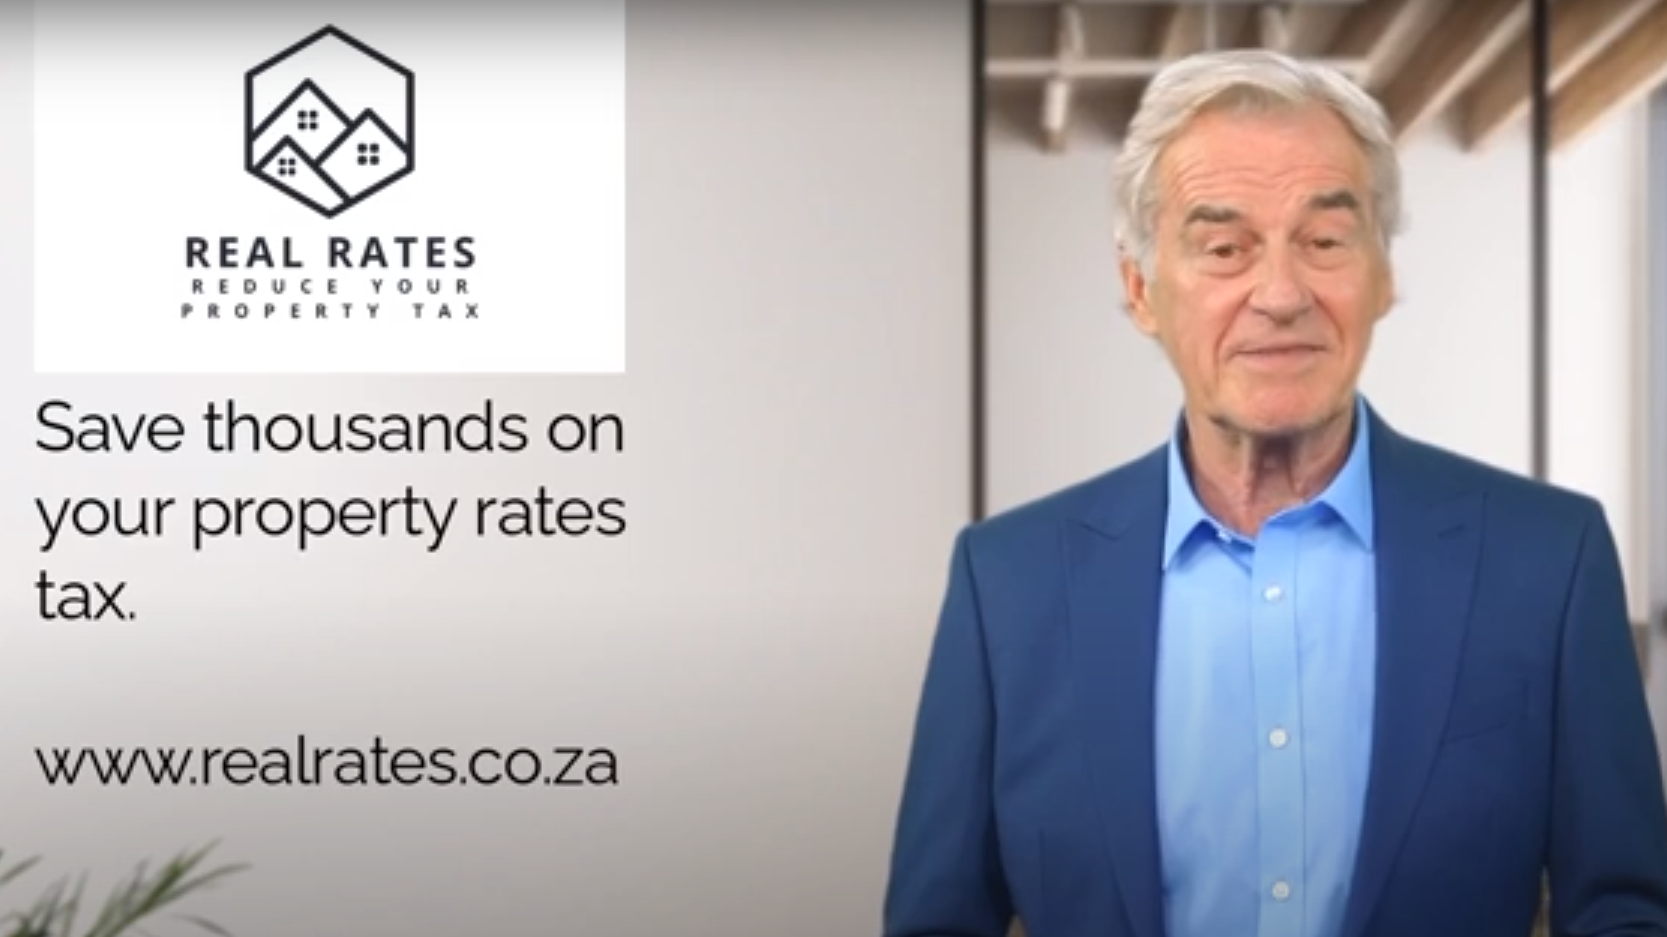 Load video: How real rates save customers thousands of rands